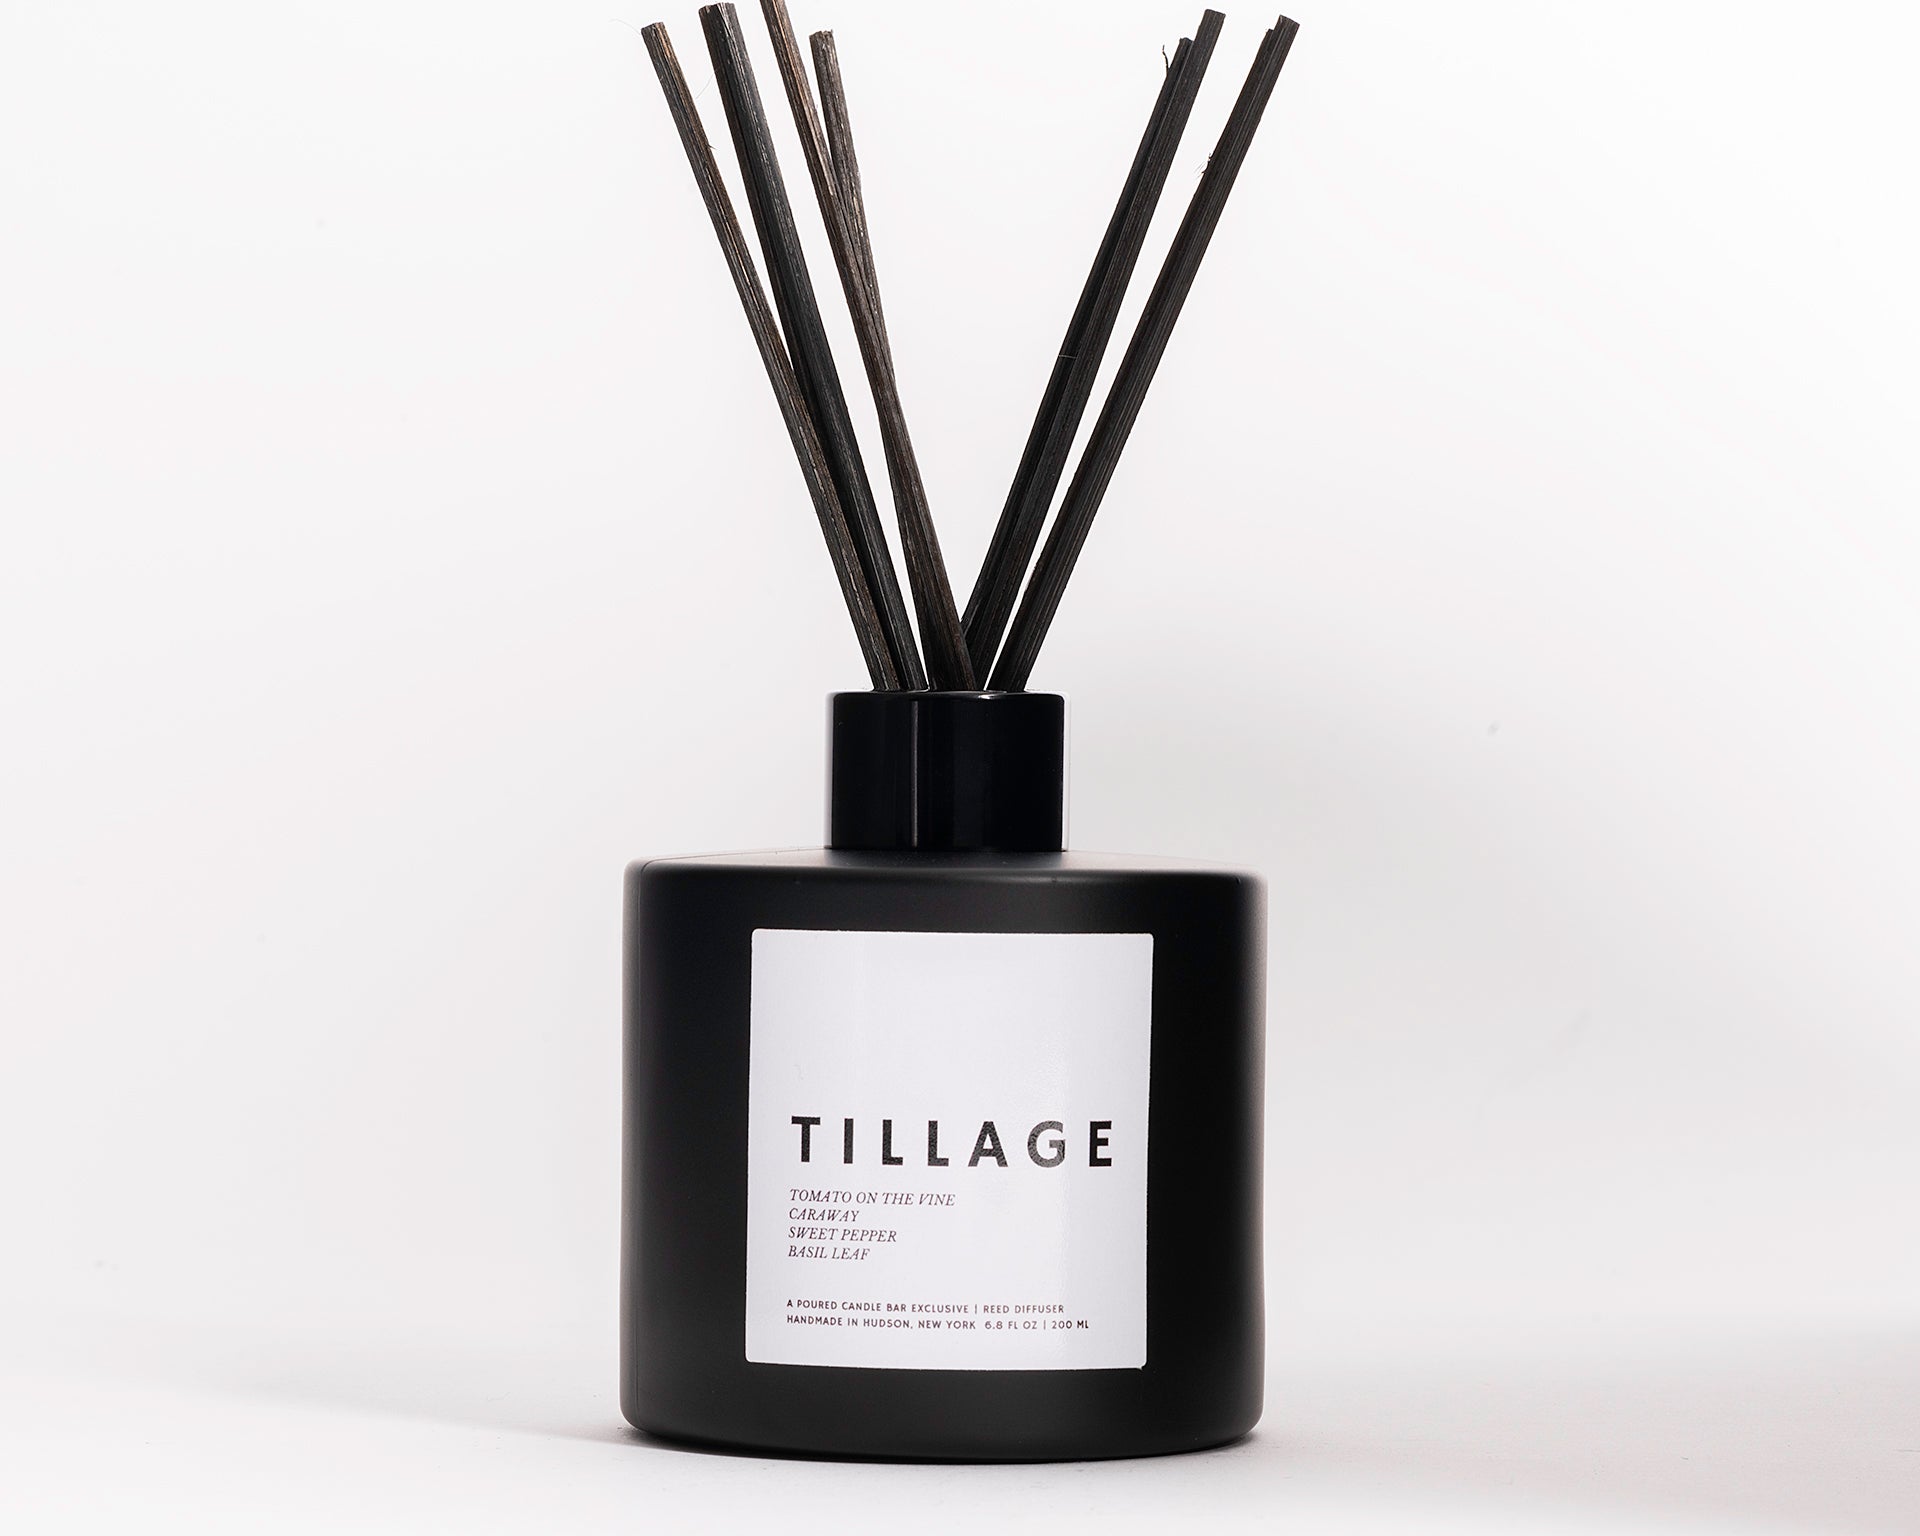 200 ml reed diffusers in a black circular glass vessel.  Profile Description: Fresh herbs with raw vegetables + subtle moss and spice  Notes: Thick Stemmed Vines, Oak Moss, Basil, Tomato, Turned Earth, Sweet Pepper